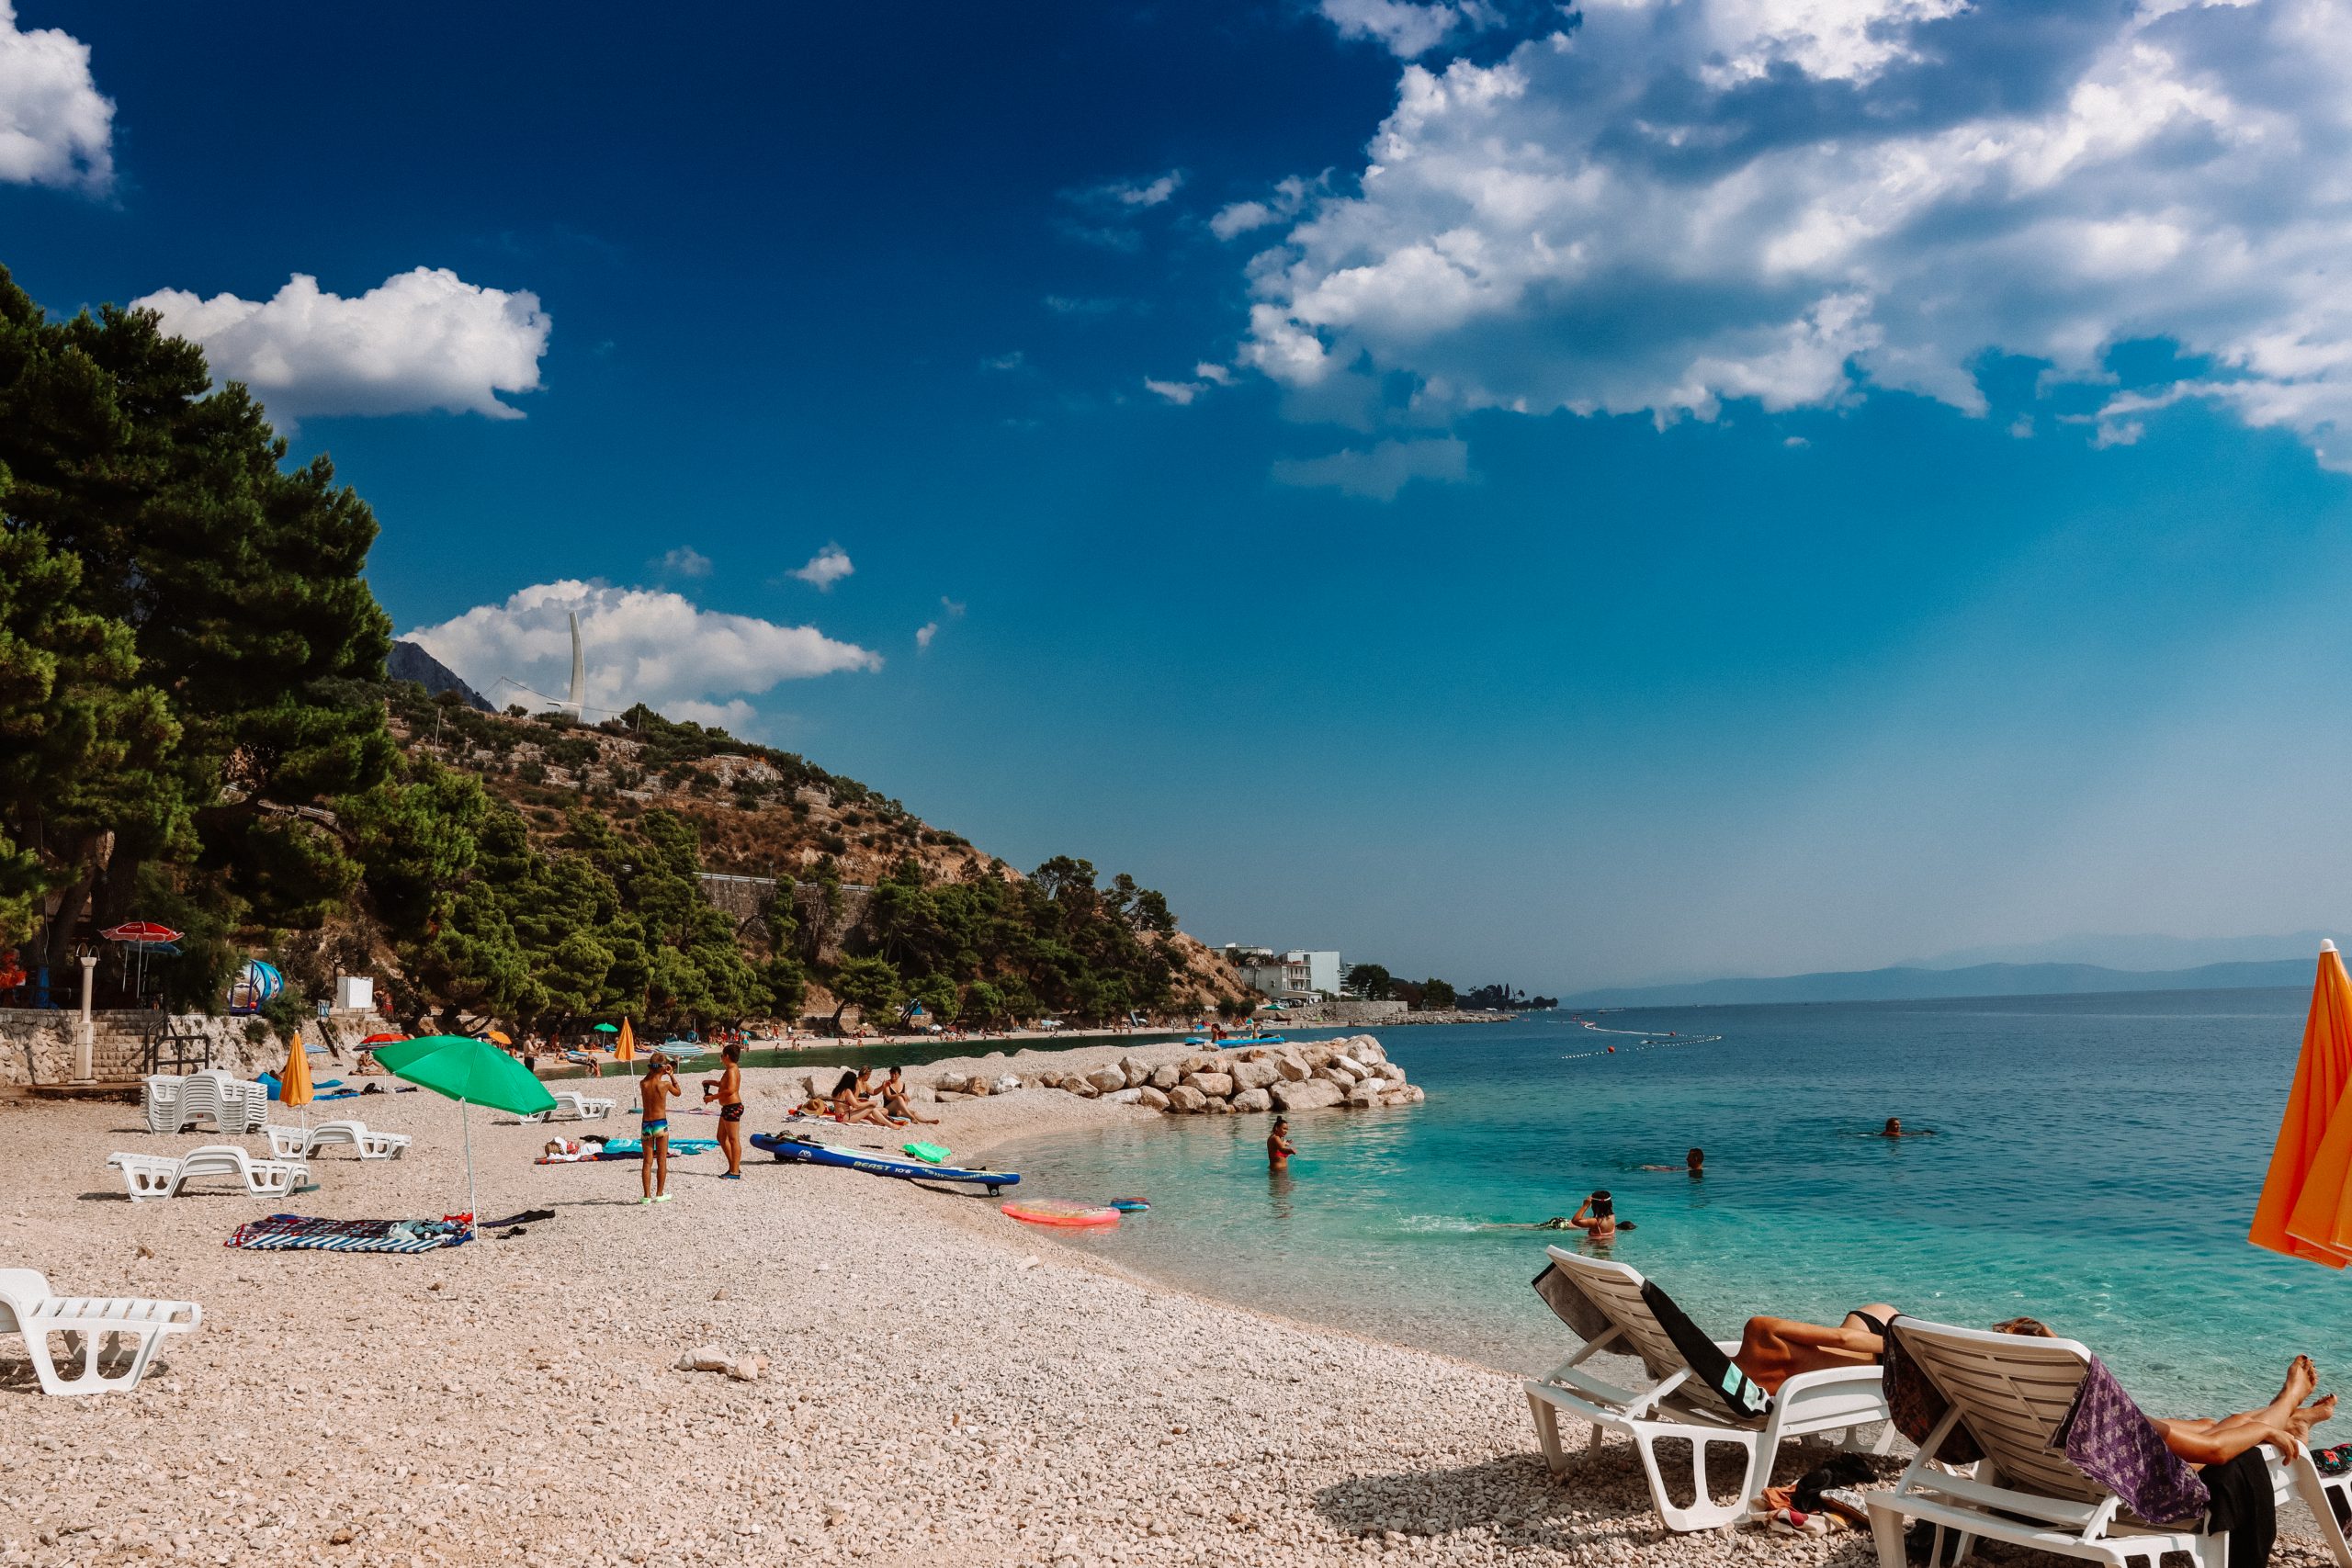 Garma bay with turquoise water. Things to do in the Croatian Riviera